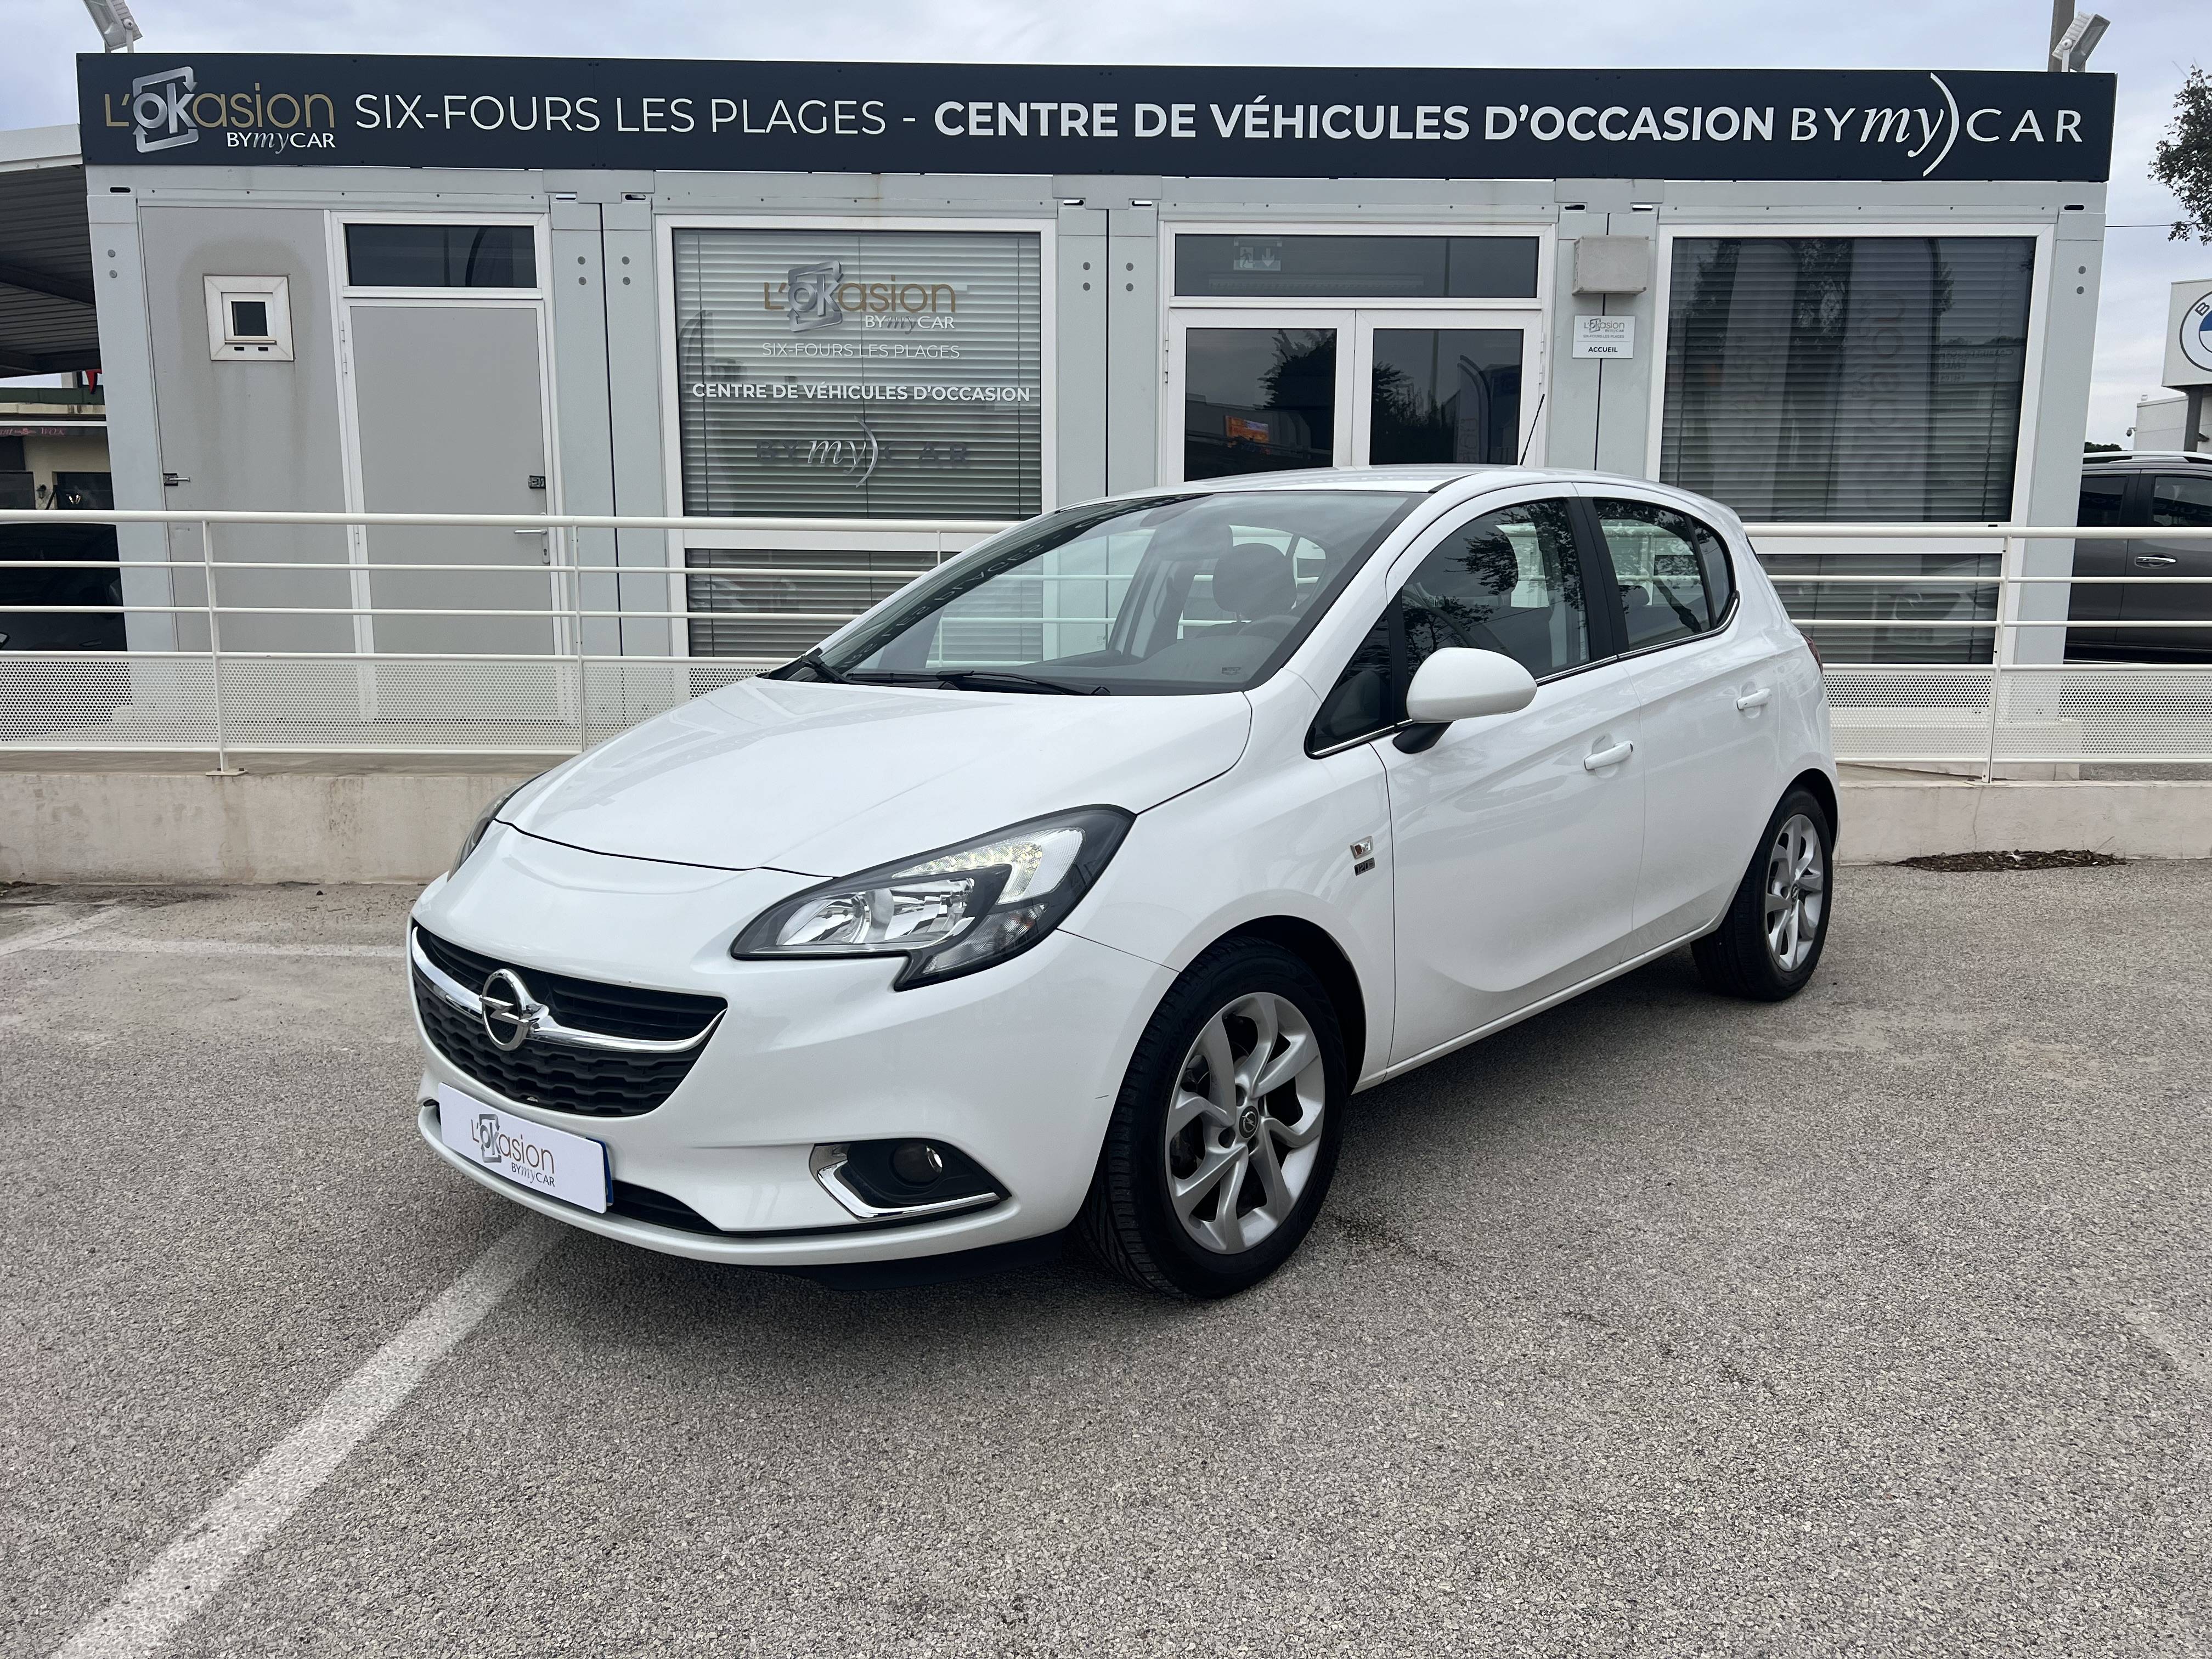 https://feassets.bymycar.fr/vo/122/253902/0/opel-corsa-14-90-ch-occasion-2019-six-fours-les-plages.jpg